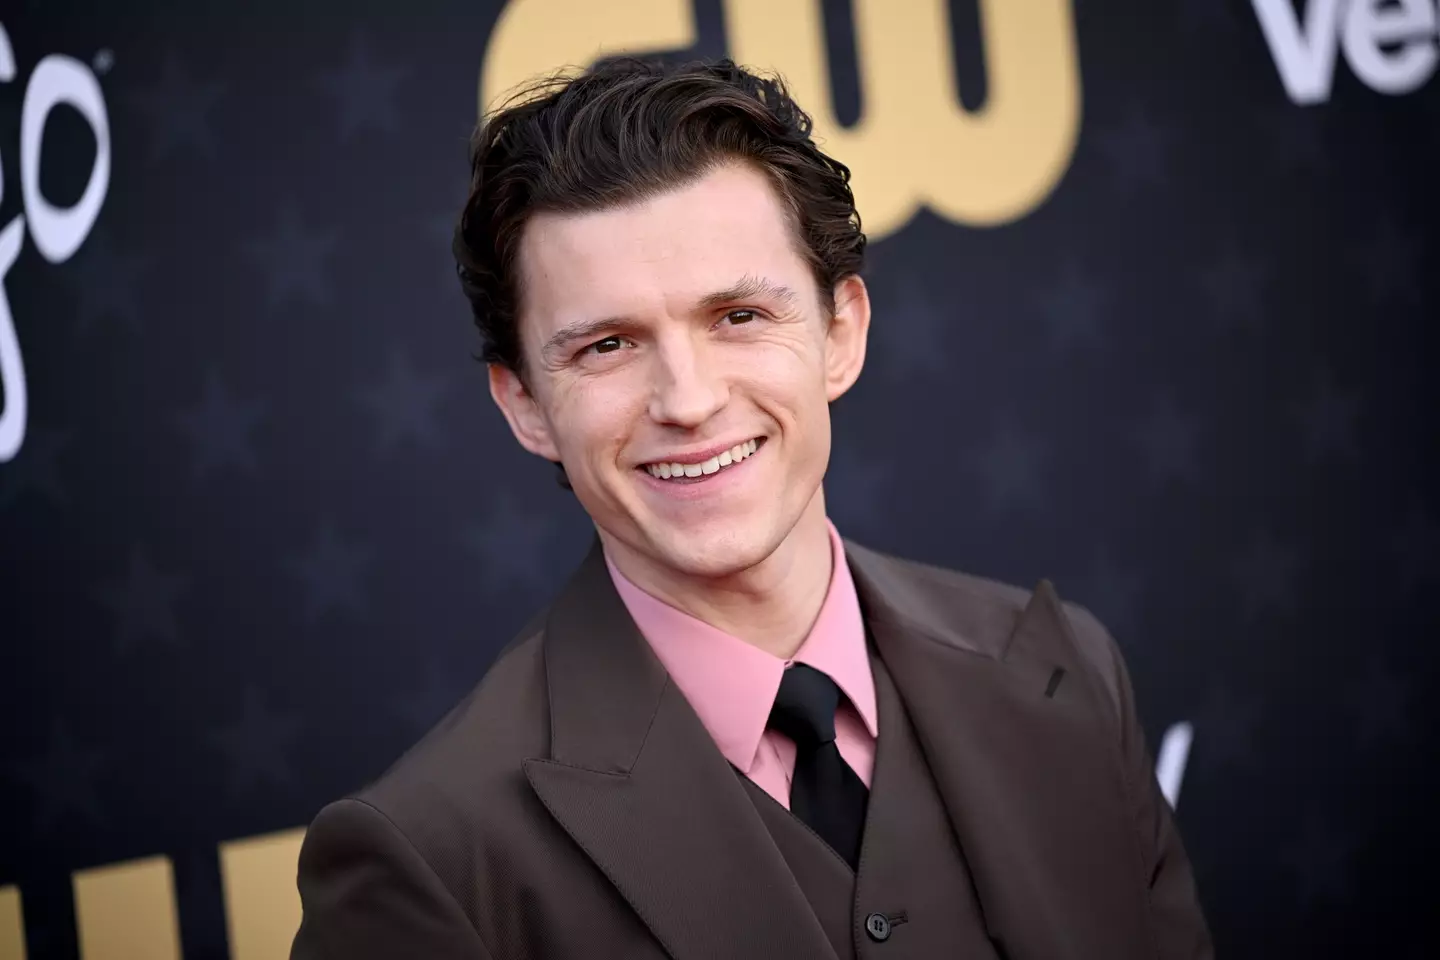 This is Tom Holland, now all that remains is to find someone called 'Tom Hollandest'.